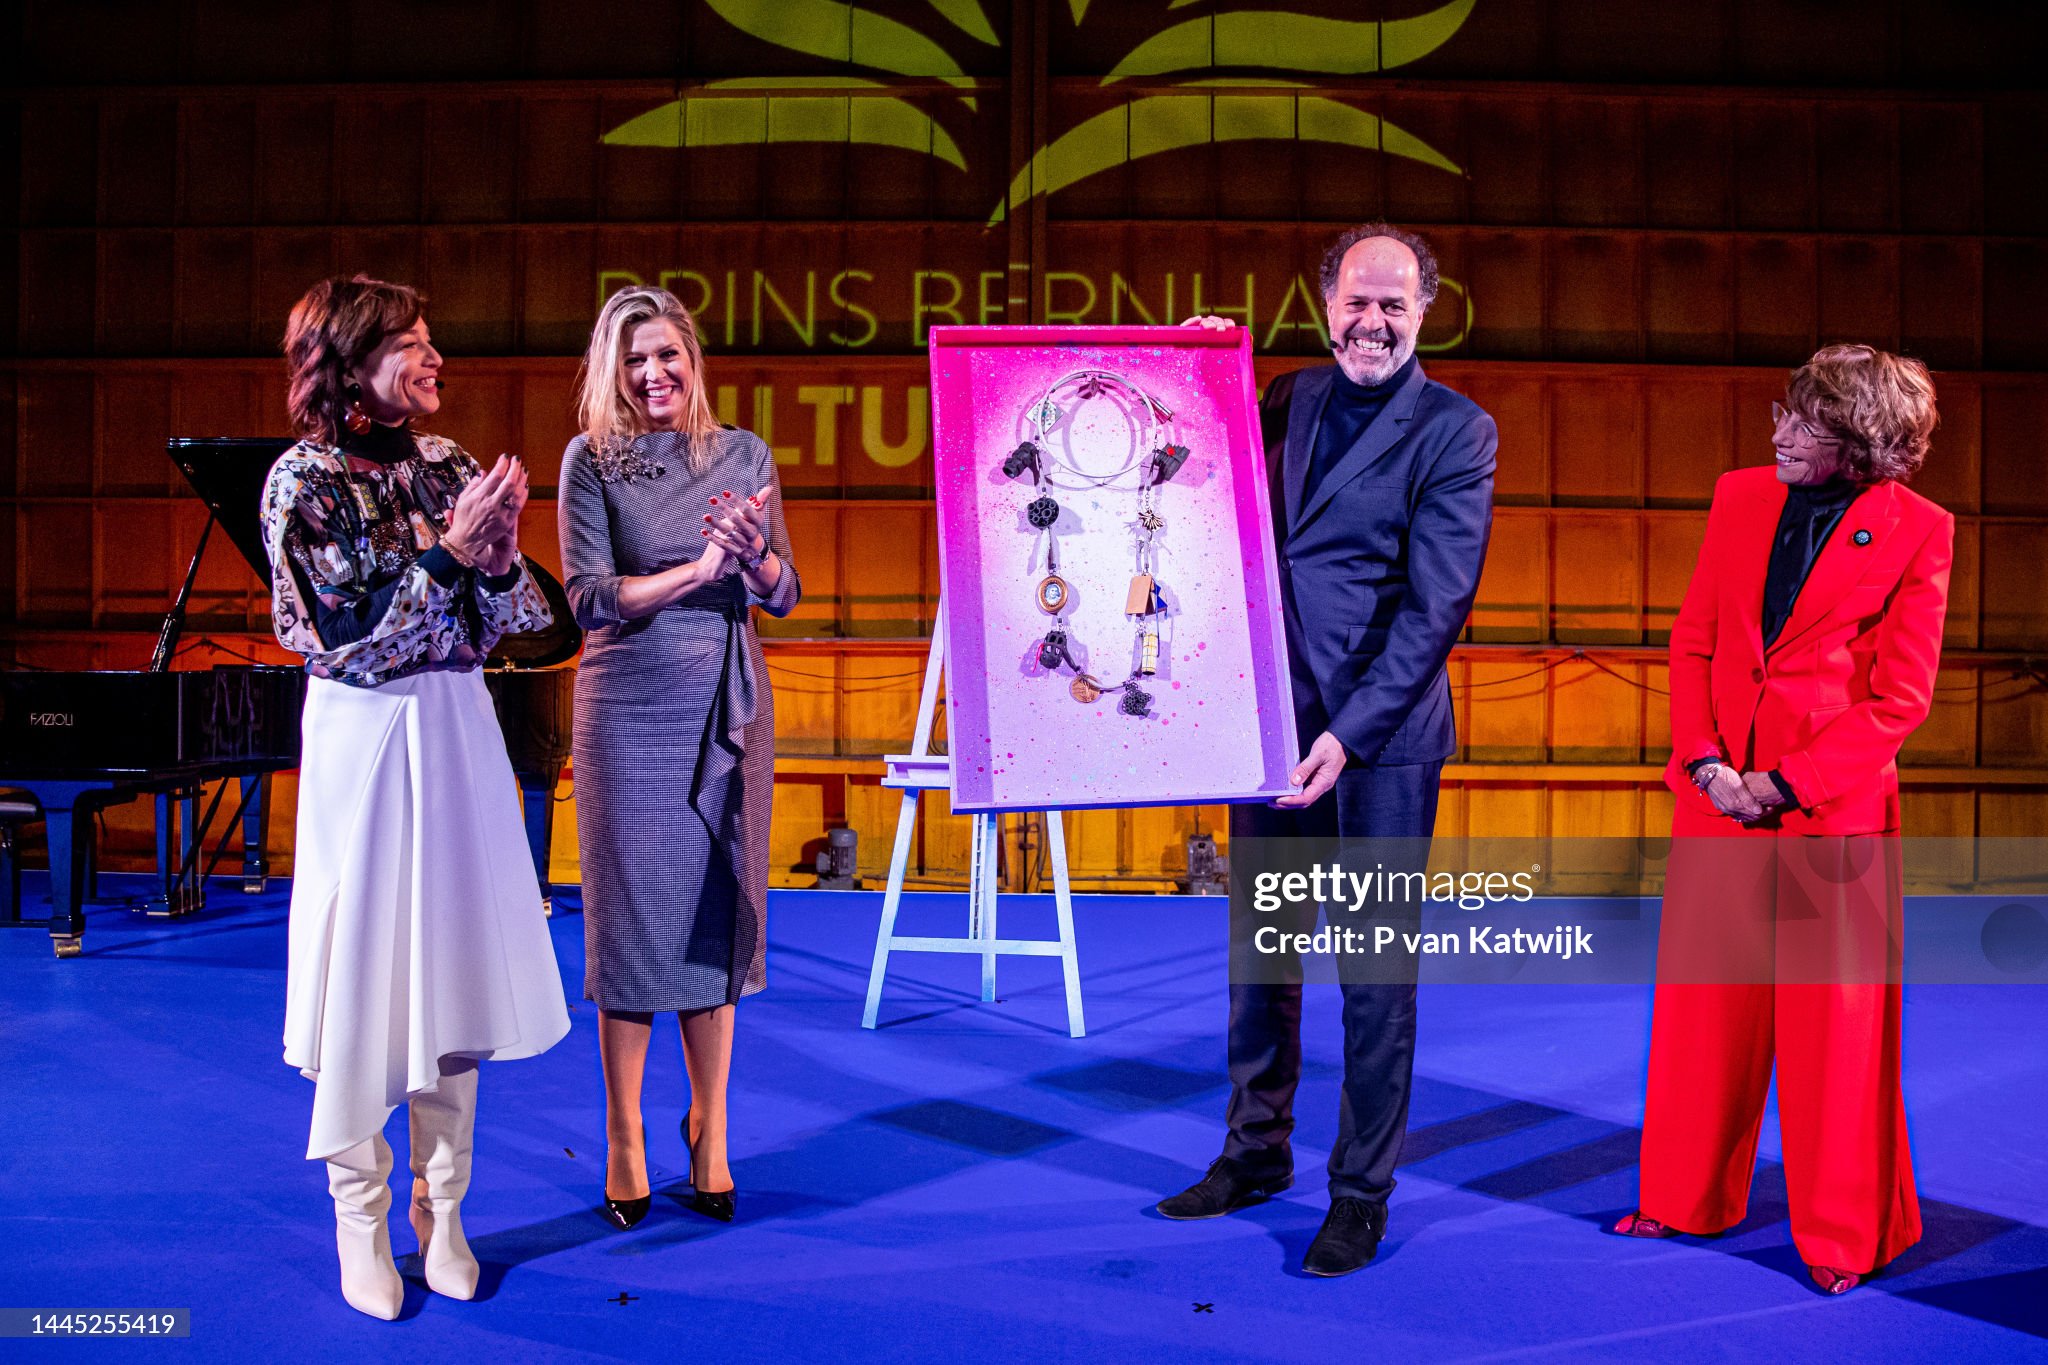 queen-maxima-of-the-netherlands-attands-the-prince-bernhard-culture-foundation-award-ceramony.jpg?s=2048x2048&w=gi&k=20&c=3udVwMA-fgTu16XSOgTijIc24xup-33ss5qr7riGJ18=